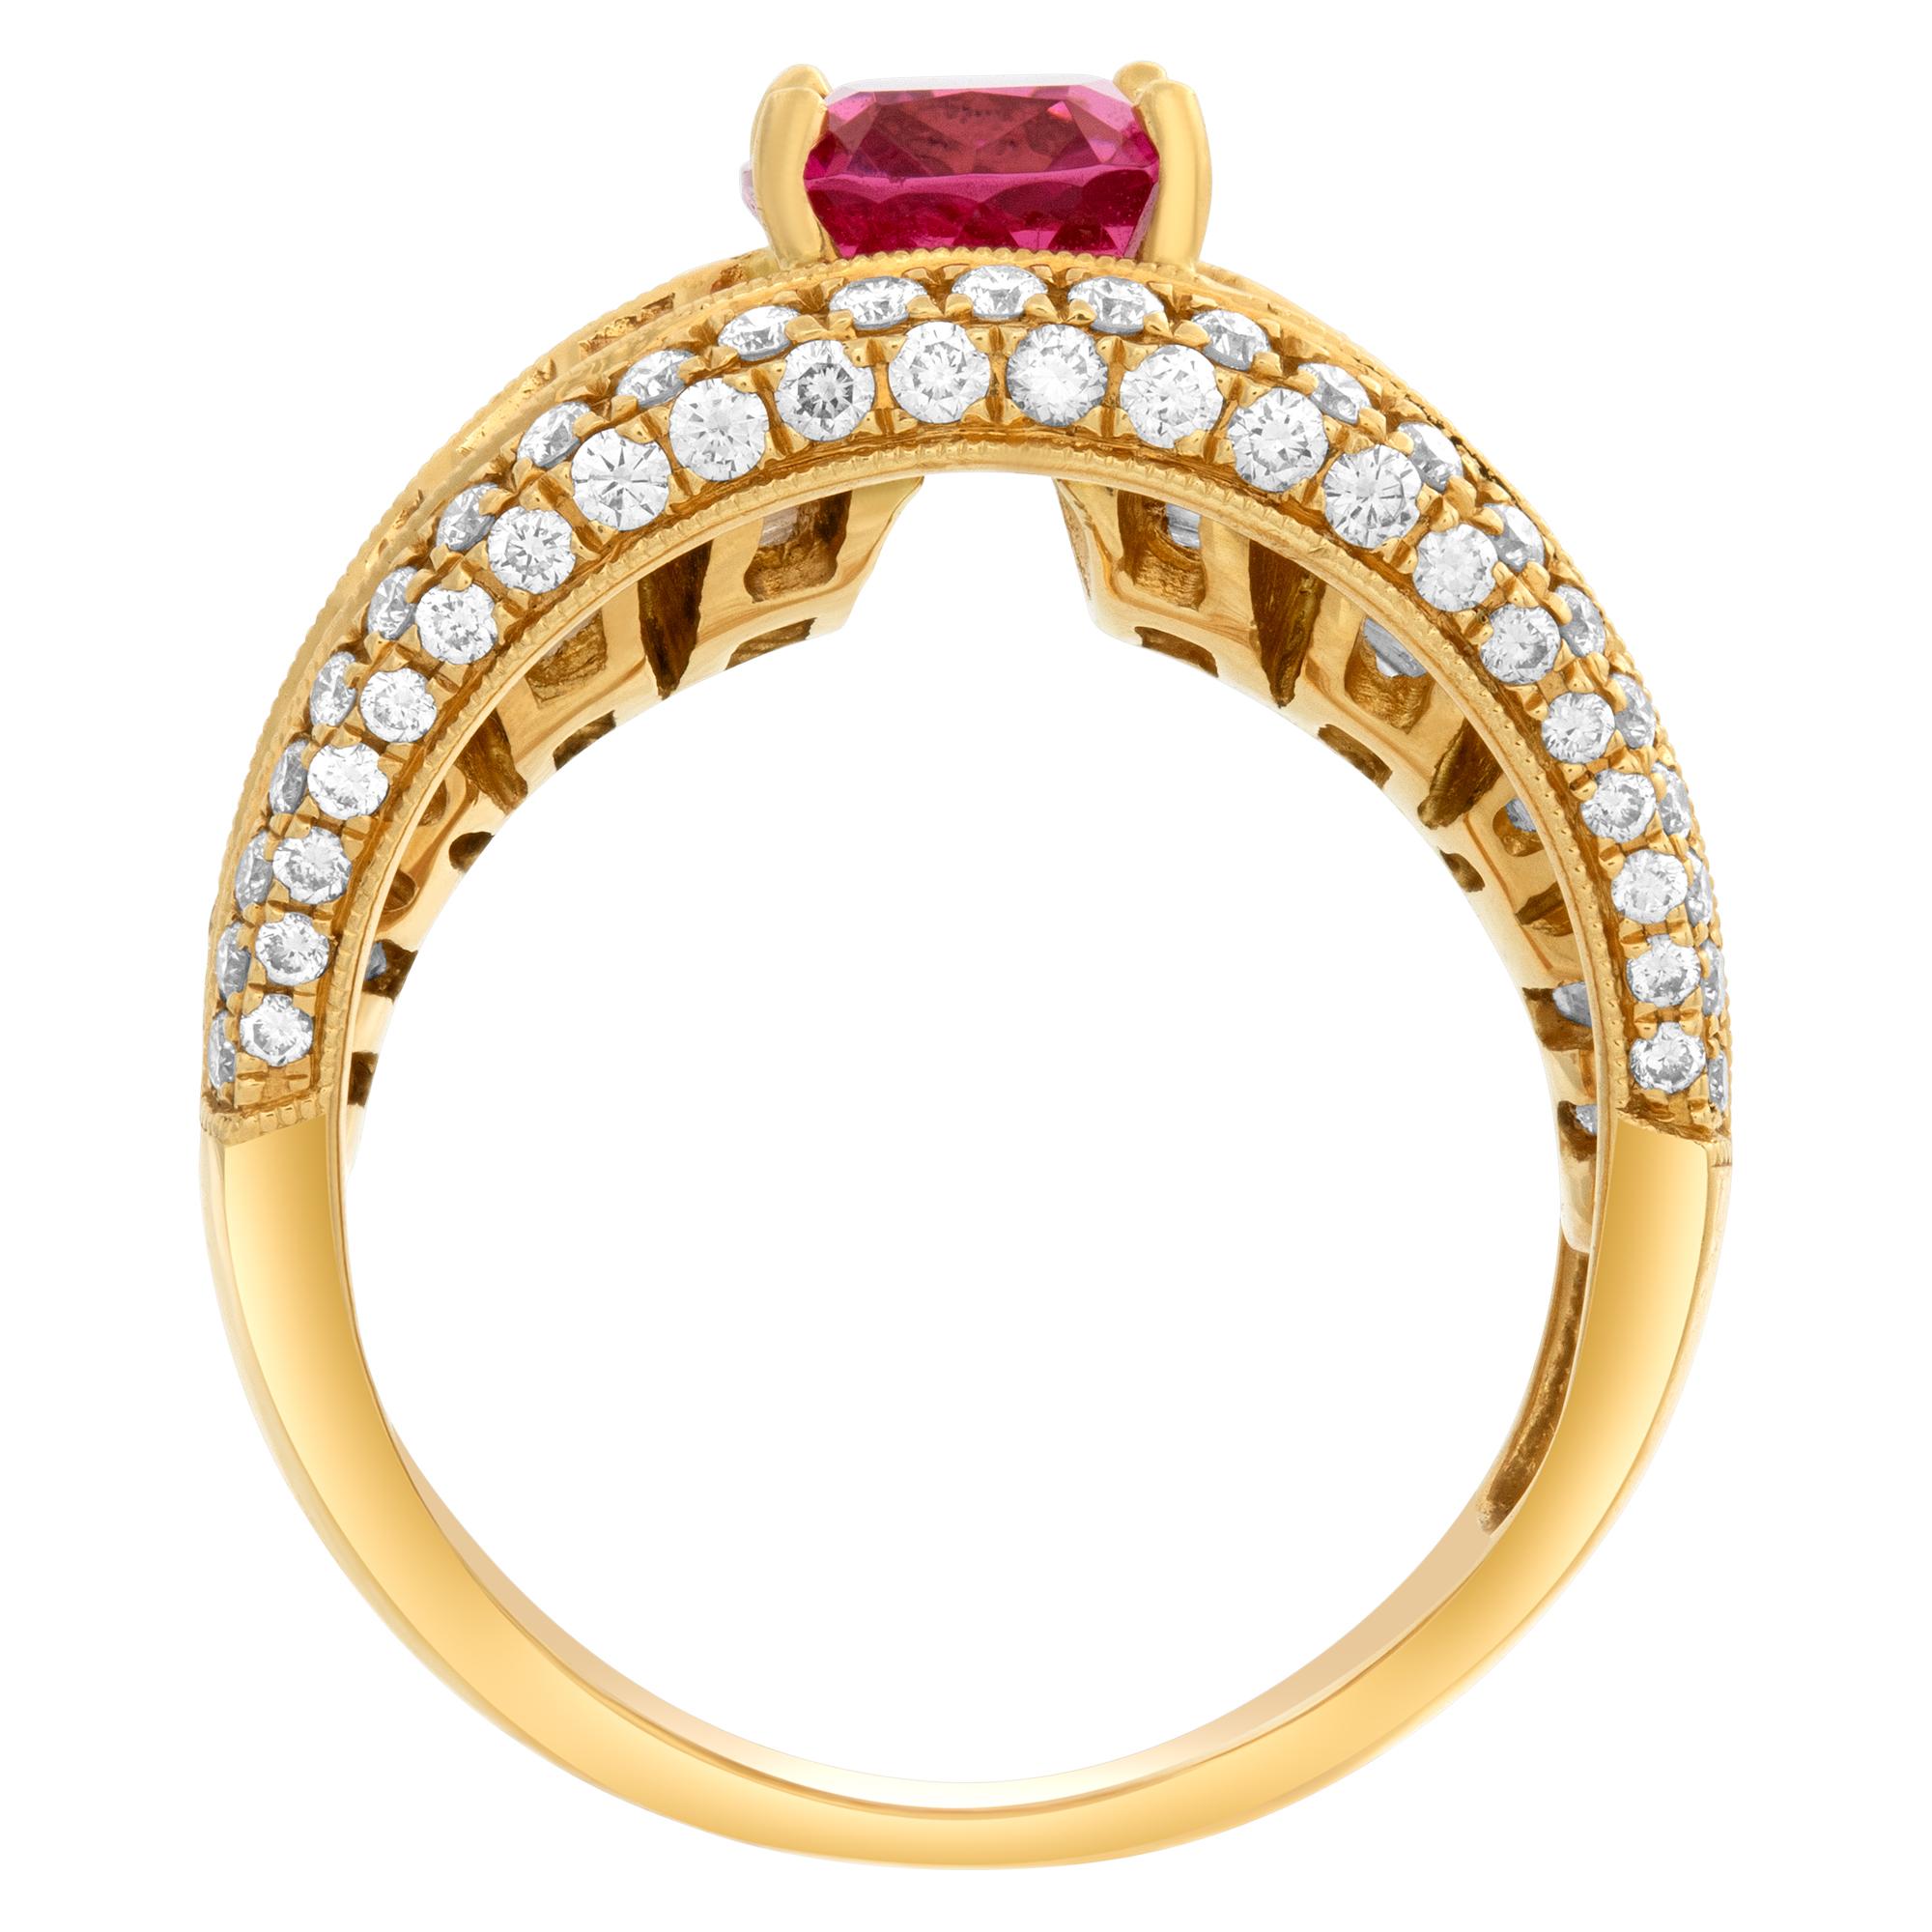 18k Yellow Gold Ring with Oval Brilliant Cut Pink Spinel '2.73 Carats' & Diamond For Sale 1